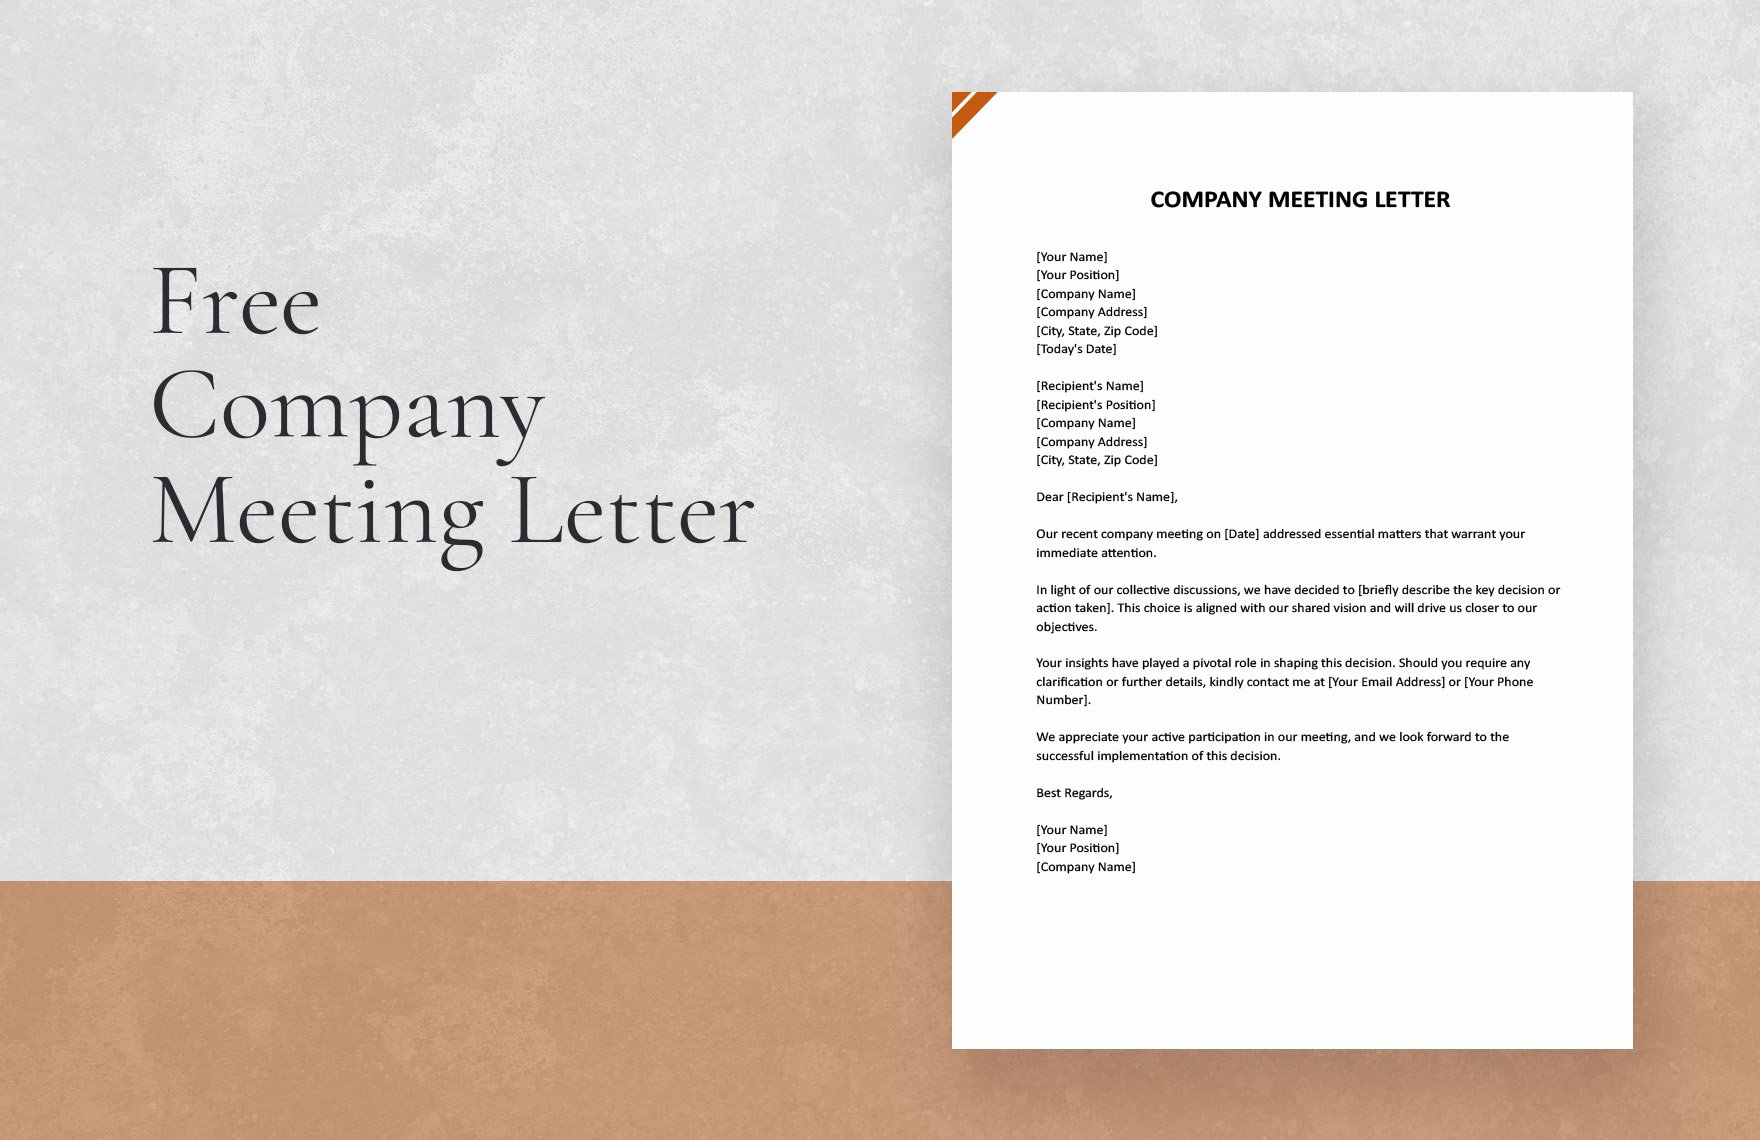 Free Company Meeting Letter